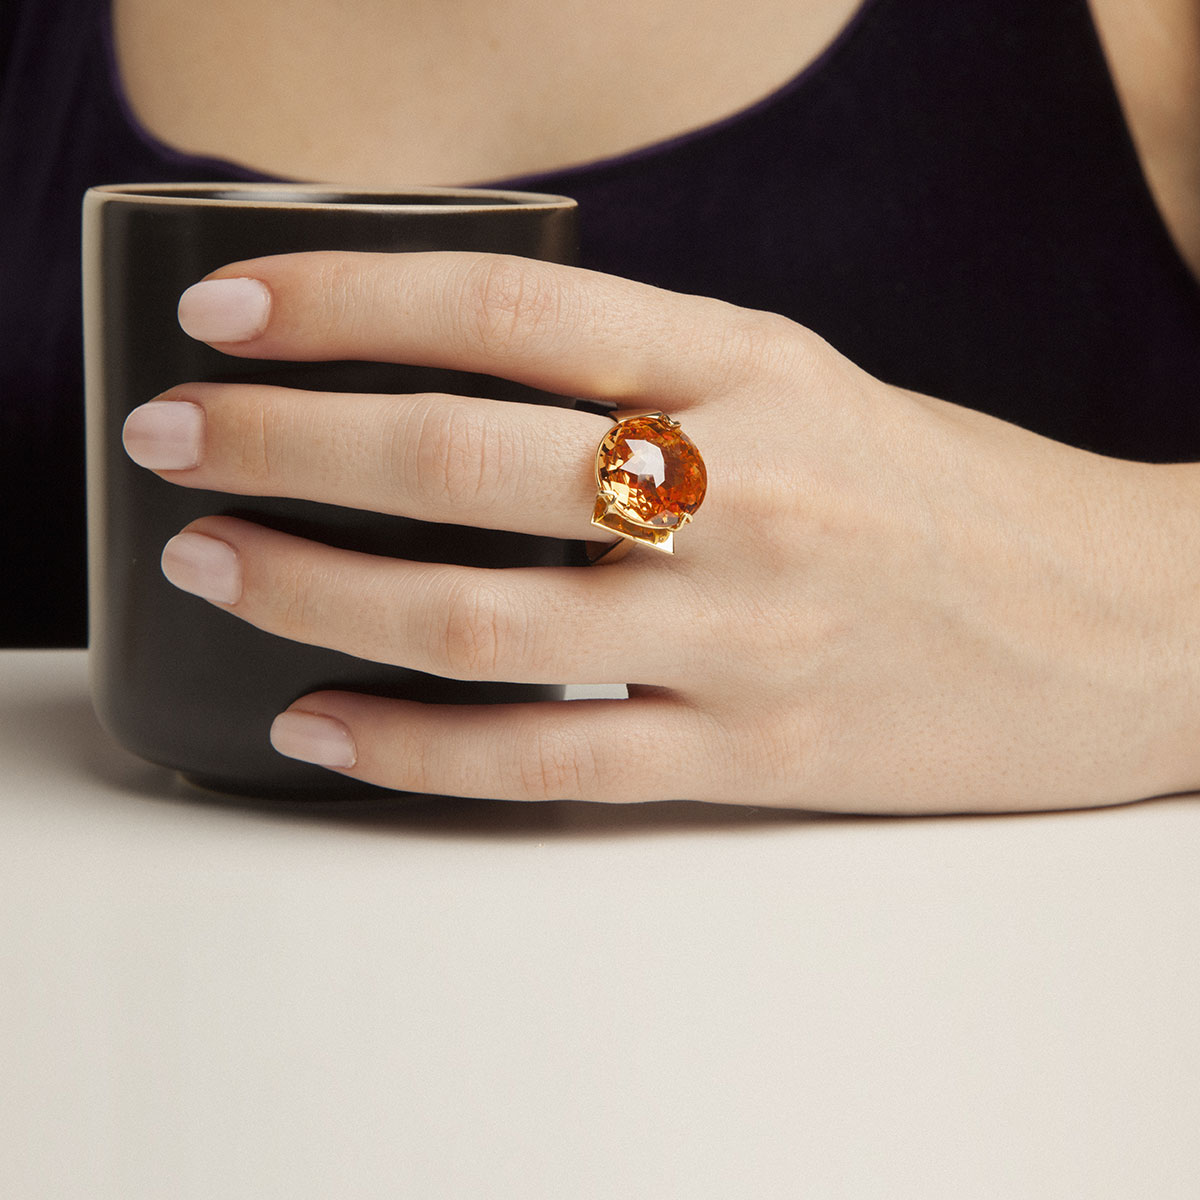 Ros handcrafted ring in 9k or 18k gold and honey hydrothermal quartz designed by Belen Bajo m1